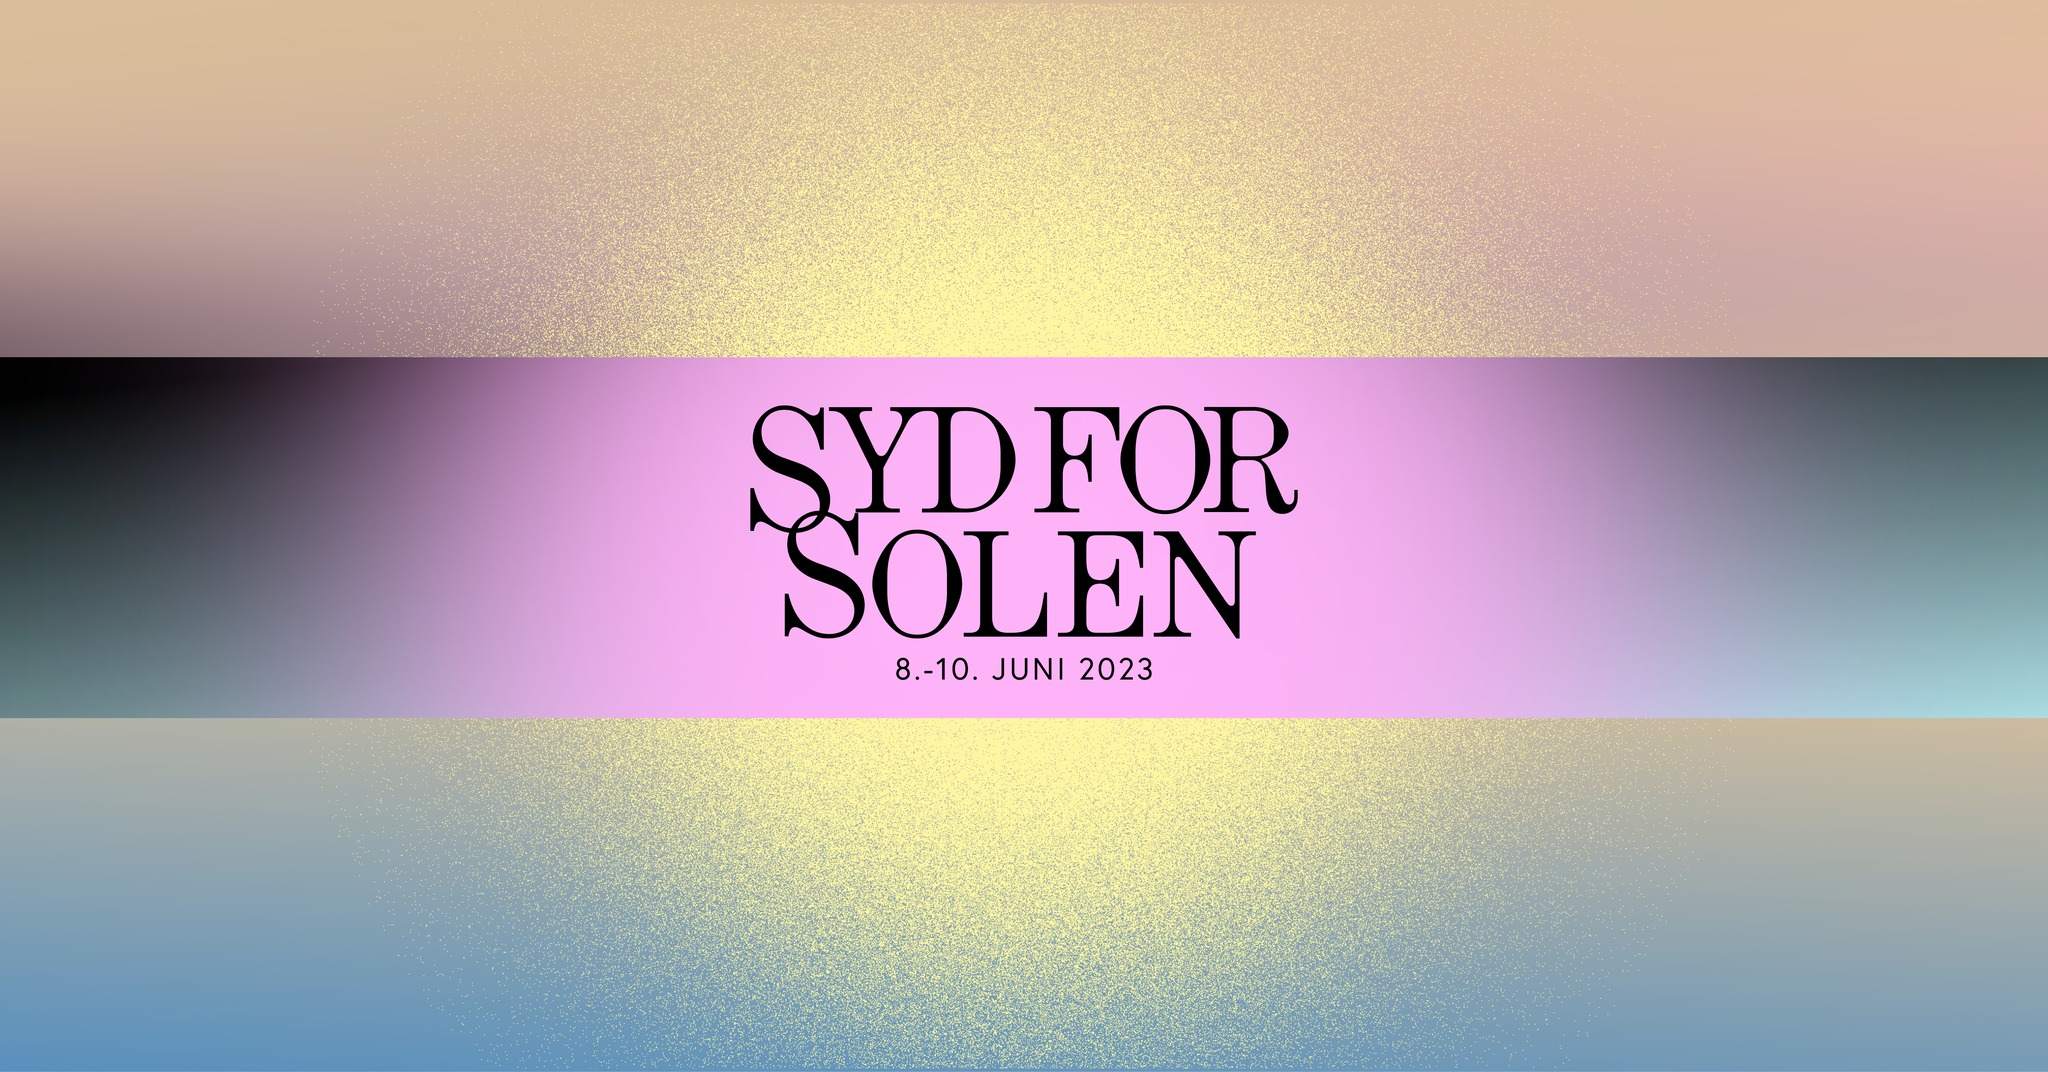 SYD FOR SOLEN 2023 - フライヤー表